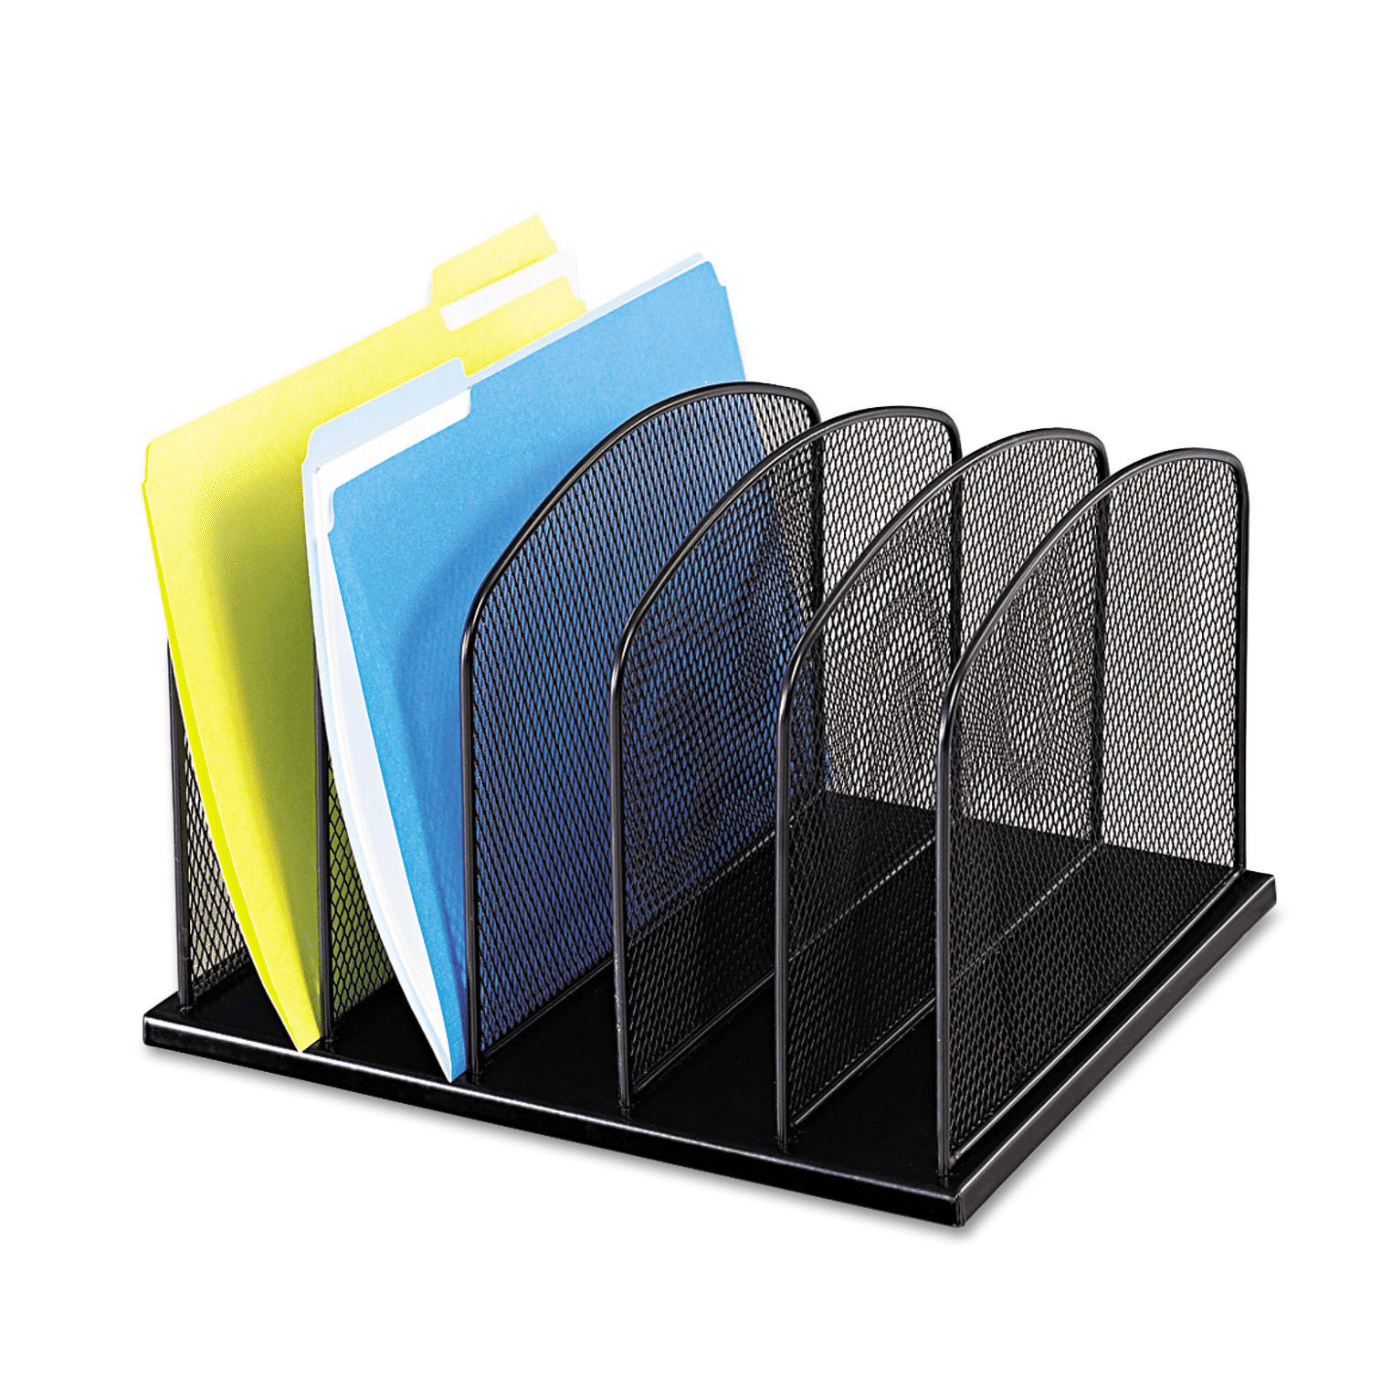 Safco Products 5-Section Horizontal Mesh Desk Organizers, Black